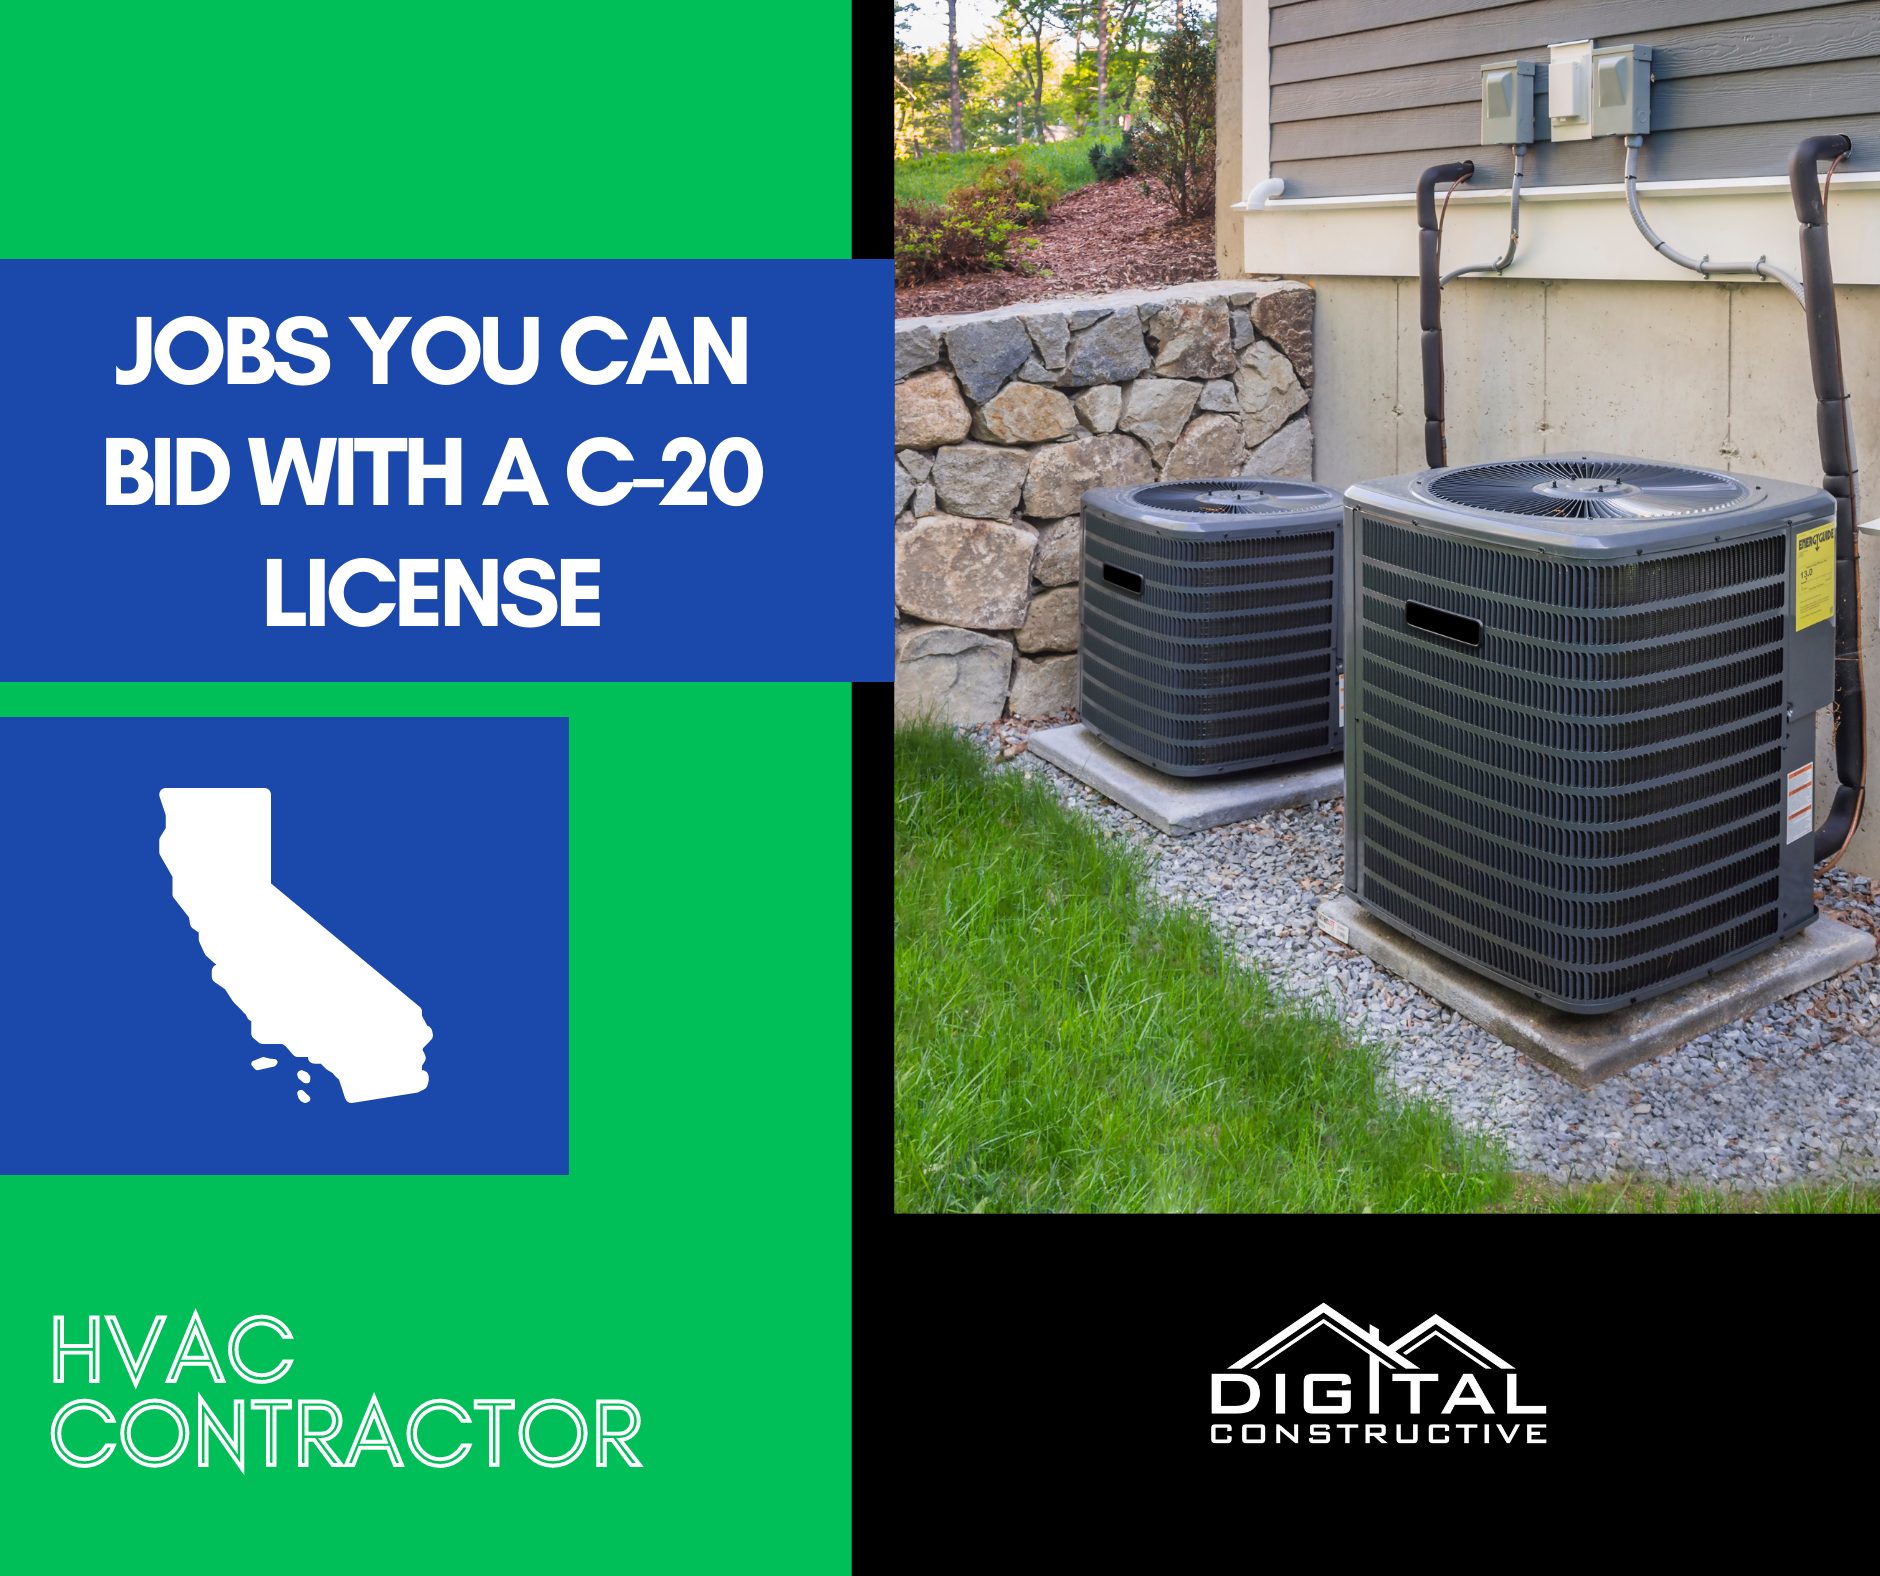 What jobs can you bid with a C-20 Hvac license in California